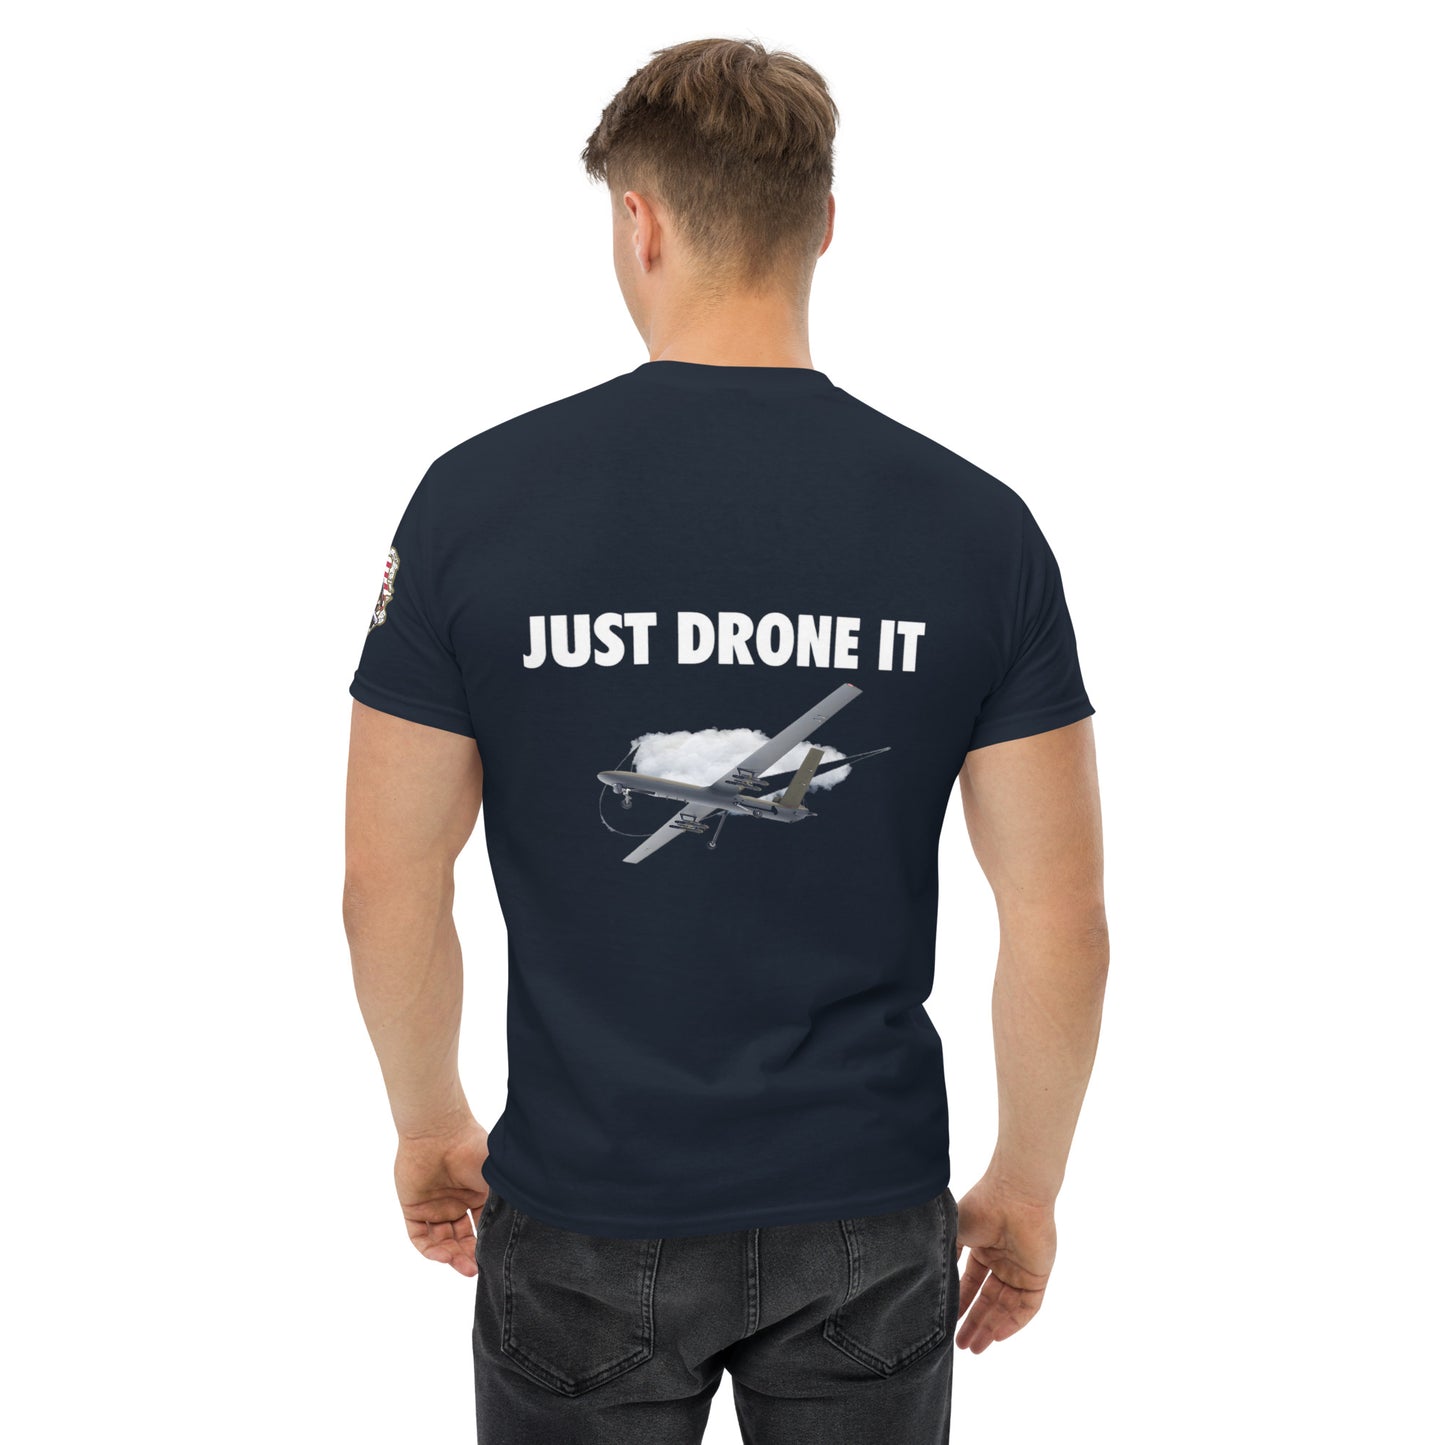 Just Drone It!